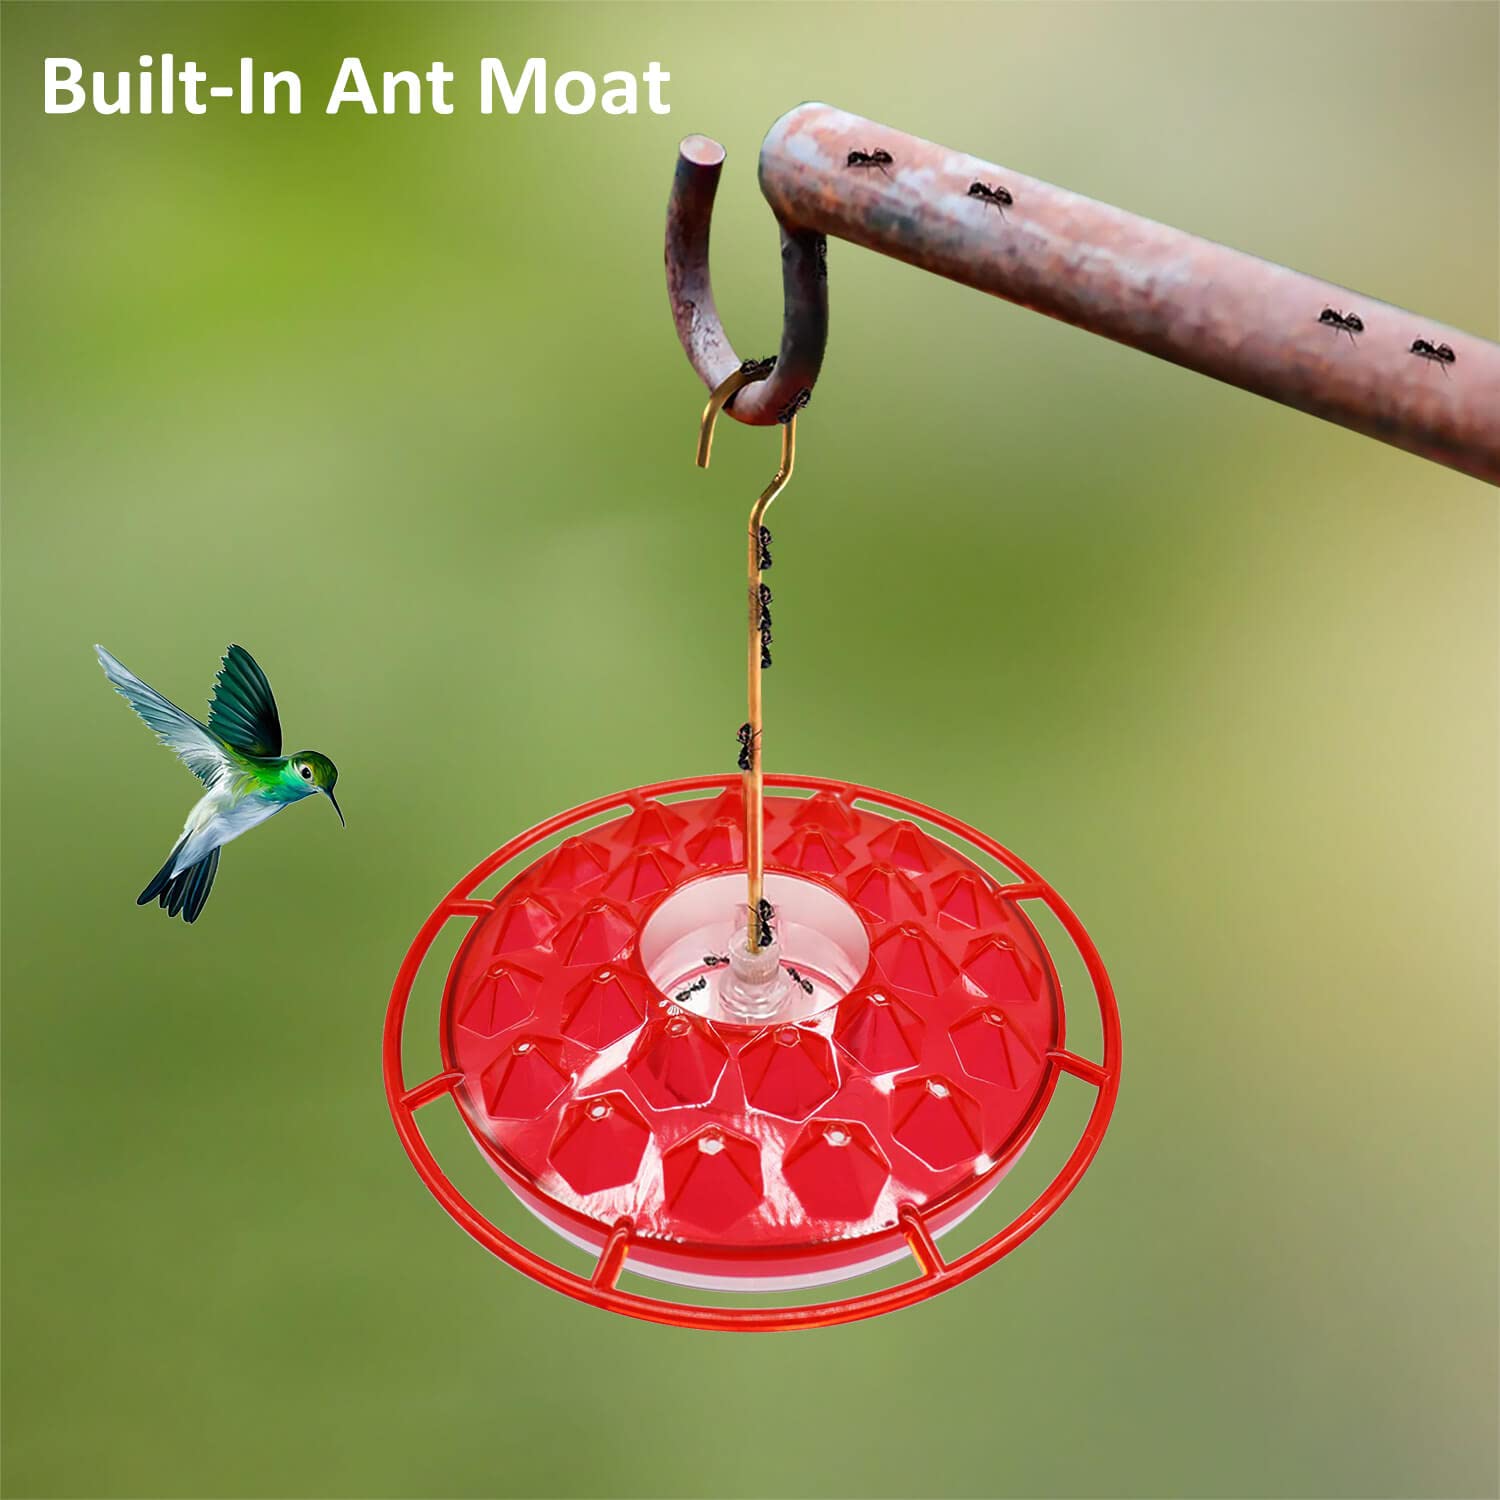 Hummingbird Feeders for Outdoors Hanging (2 Pack), 25 Feeding Ports, 10 oz, Leak-Proof Plastic Saucer Hummingbird Feeders, Easy to Assemble, Refill & Clean, with Cleaning Brushes